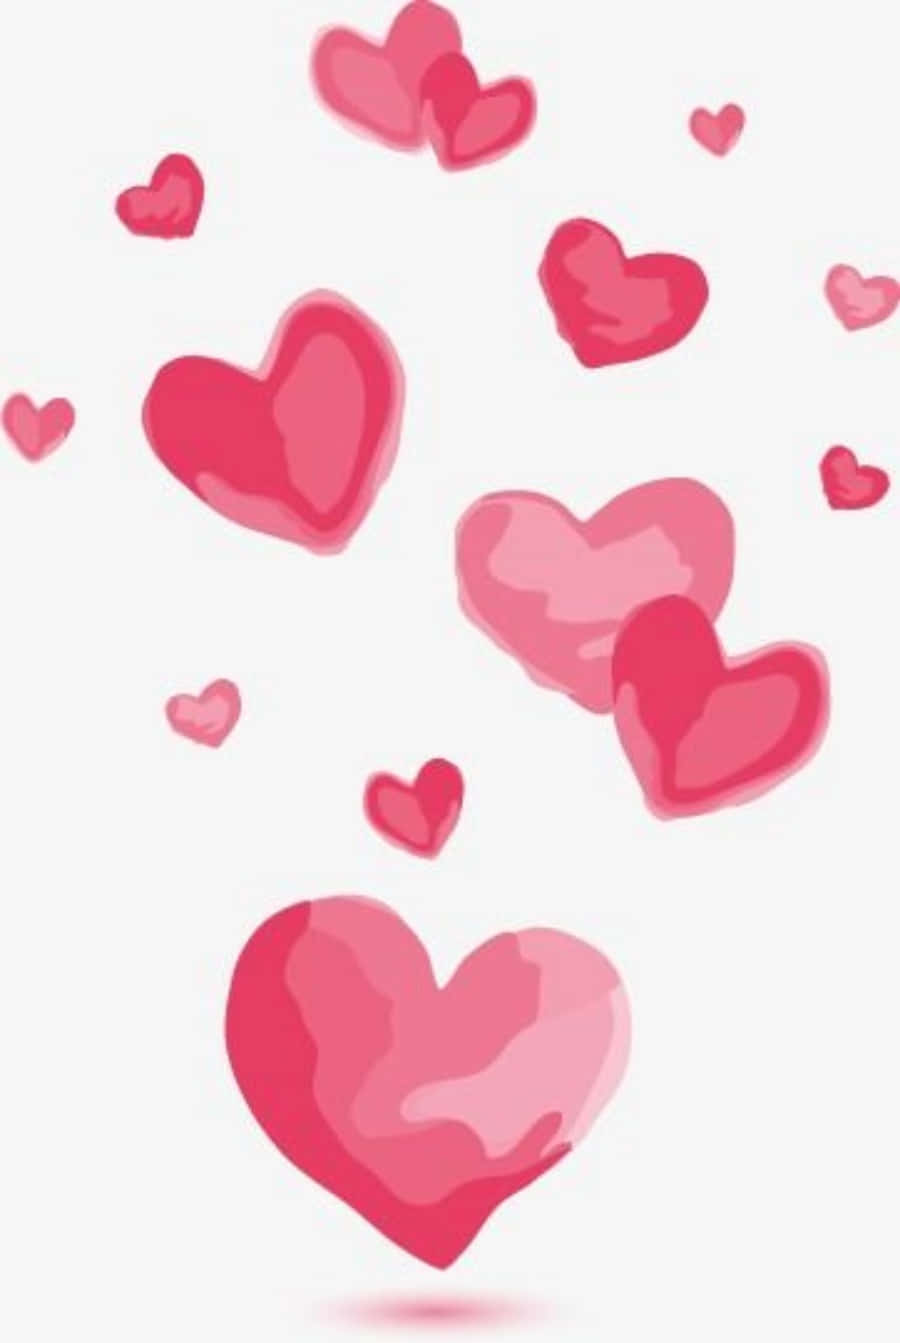 A joyful cartoon heart with outstretched arms Wallpaper